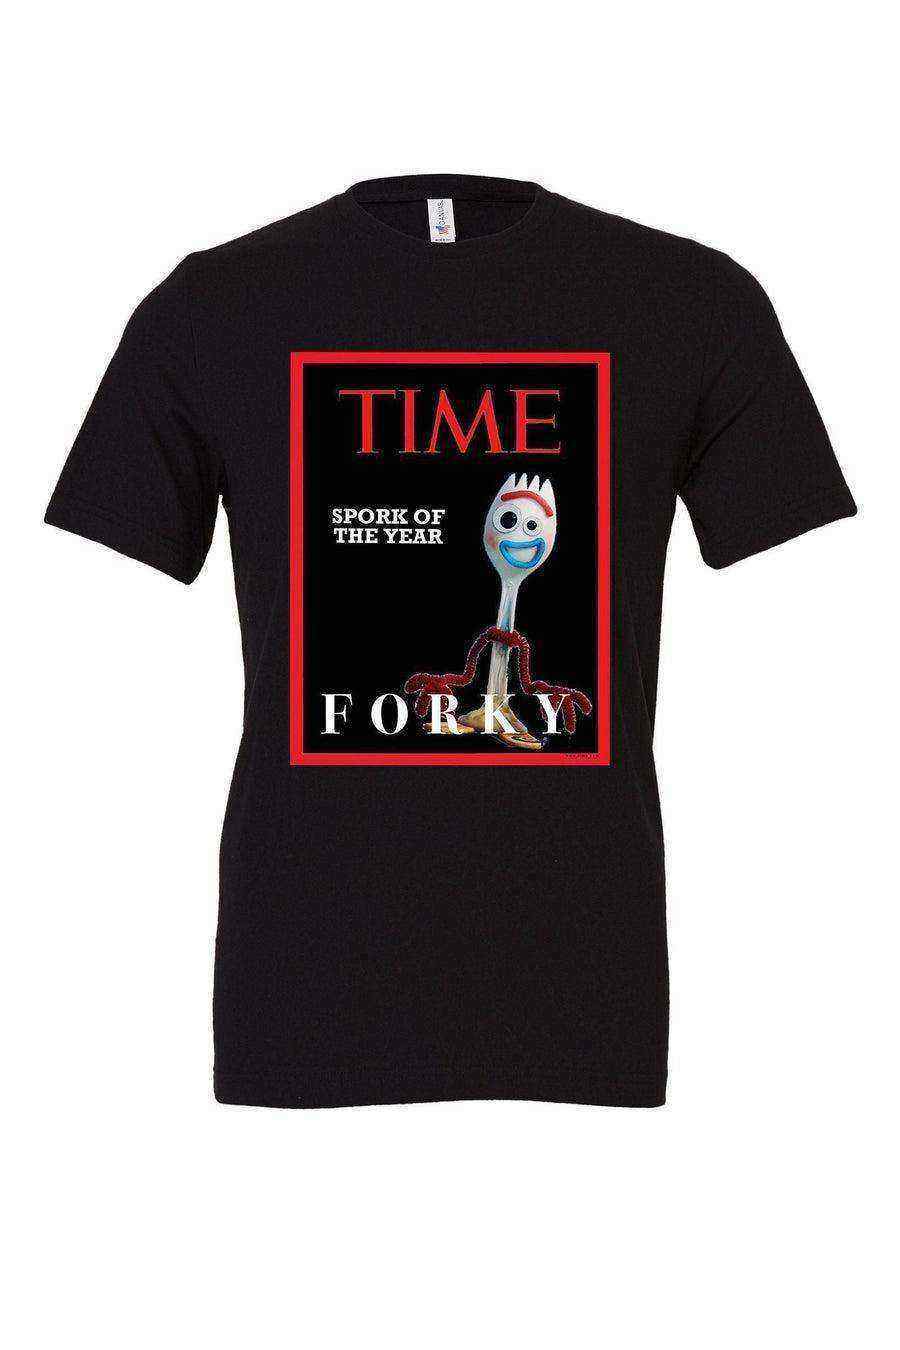 Toddler | Forky Spork Of The Year Shirt | Forky On The Cover Of Time Shirt - Dylan's Tees